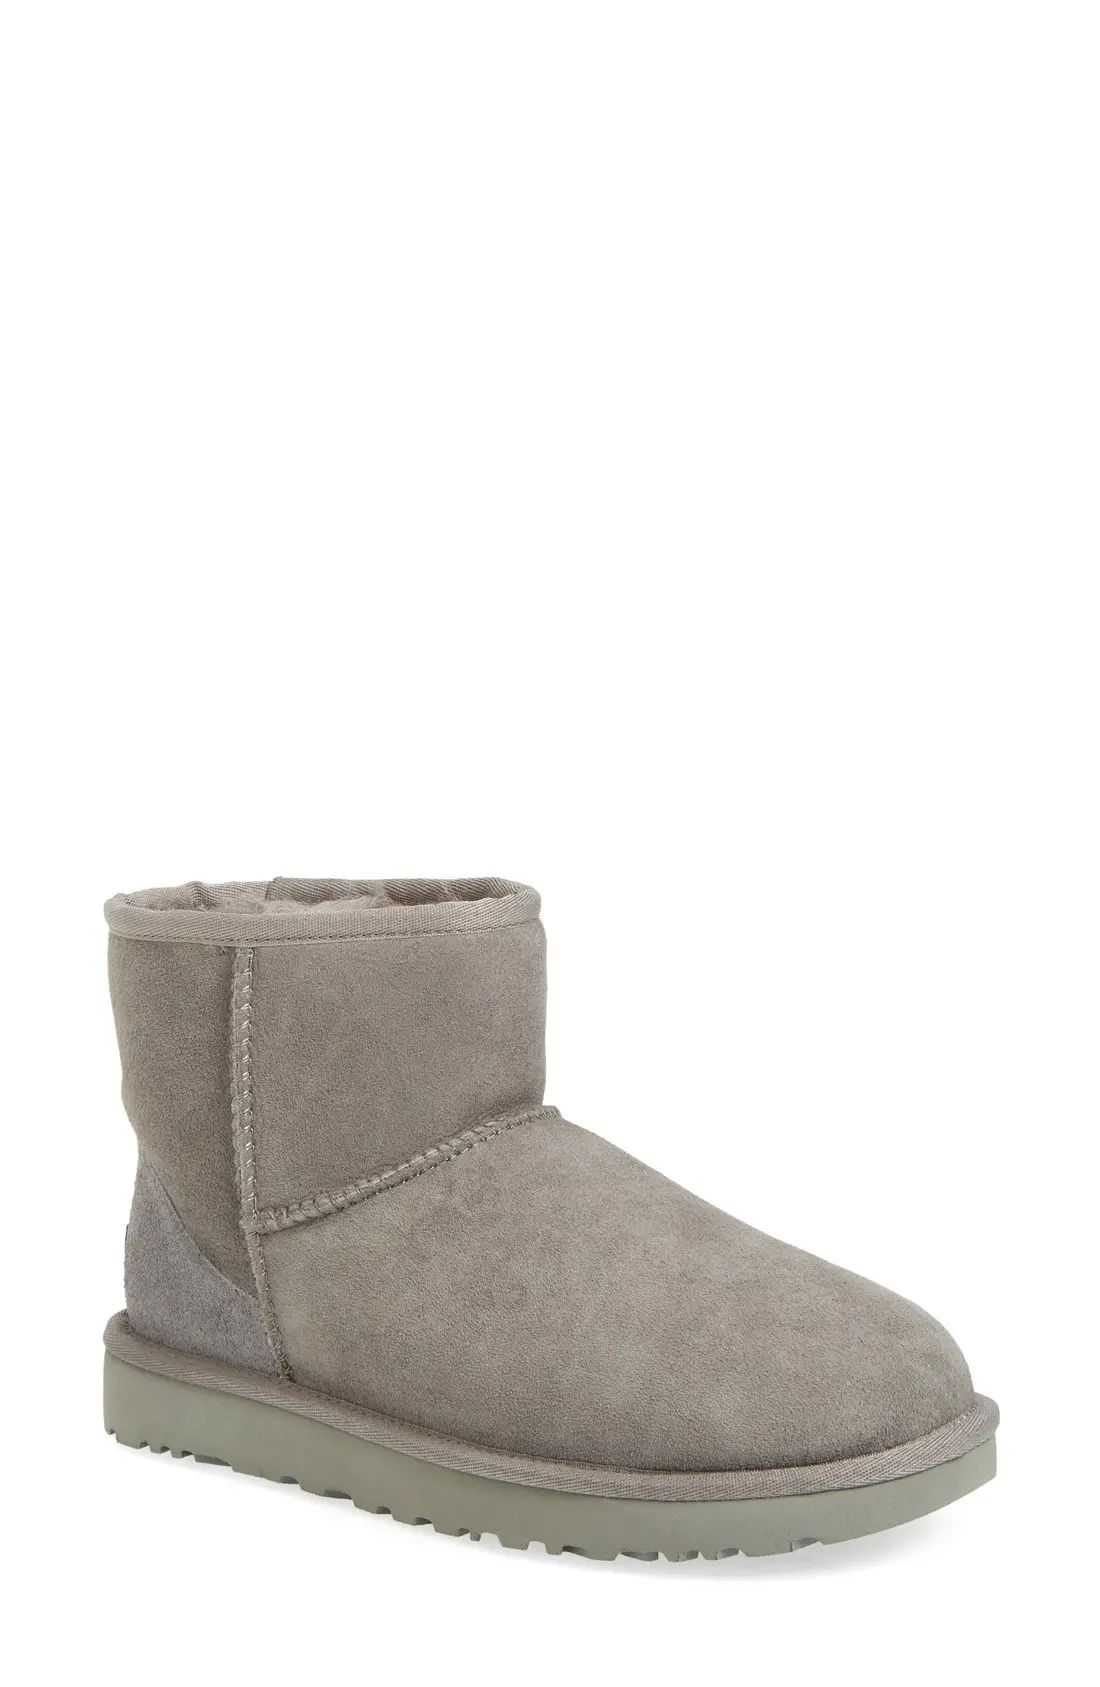 Women's UGG Classic Mini Ii Genuine Shearling Lined Boot, Size 12 M - Grey | Nordstrom